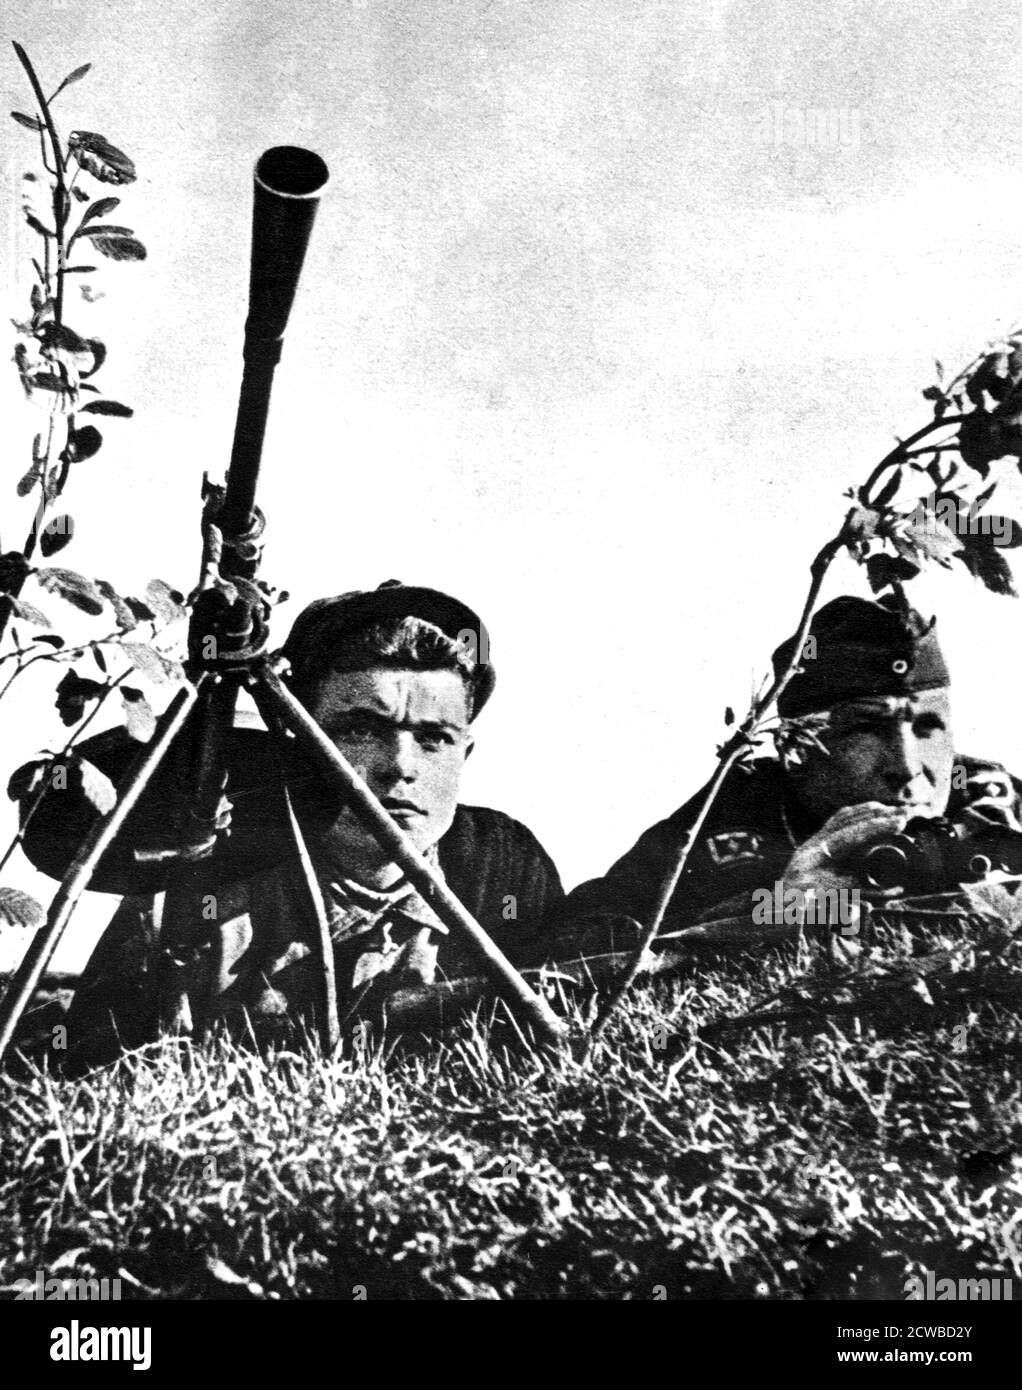 Ukrainian serving with the German army, Russian Front, 1941-1944. Detail from a German propaganda poster. When the Germans invaded the Soviet Union in 1941, many Ukrainians welcomed them as liberators. Western Ukraine was occupied by the Soviets in 1939. Under German occupation, Ukrainian nationalist partisans fought on both sides. The photographer is unknown. Stock Photo